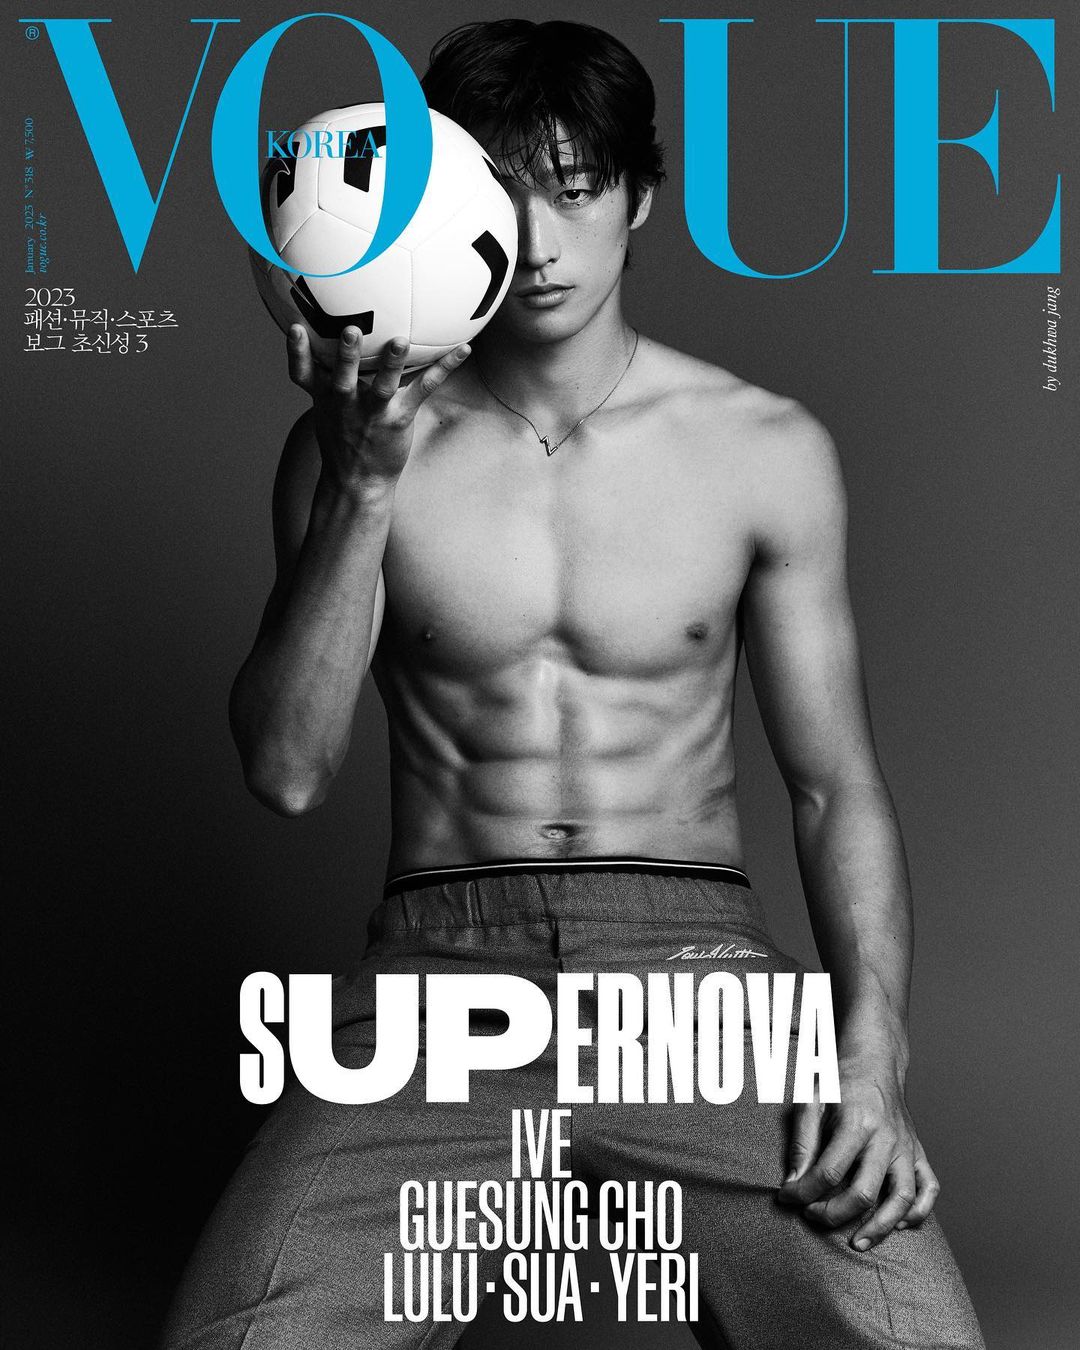 VOGUE | 2023 JAN. | IVE, CHO GUE-SUNG COVER